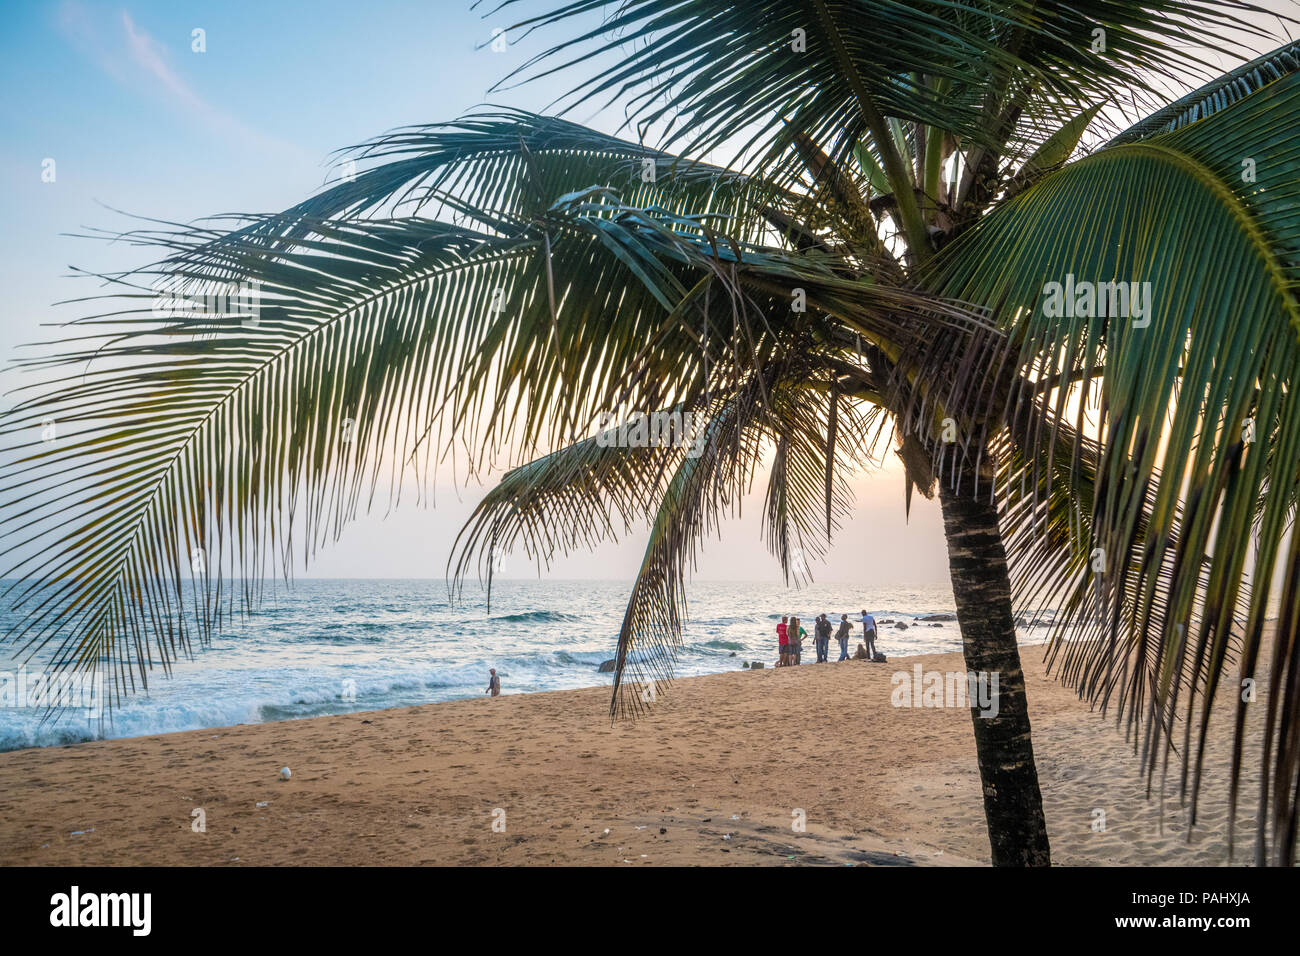 A group of people hangout on the beach looking out into the waves Monrovia, Liberia Stock Photo